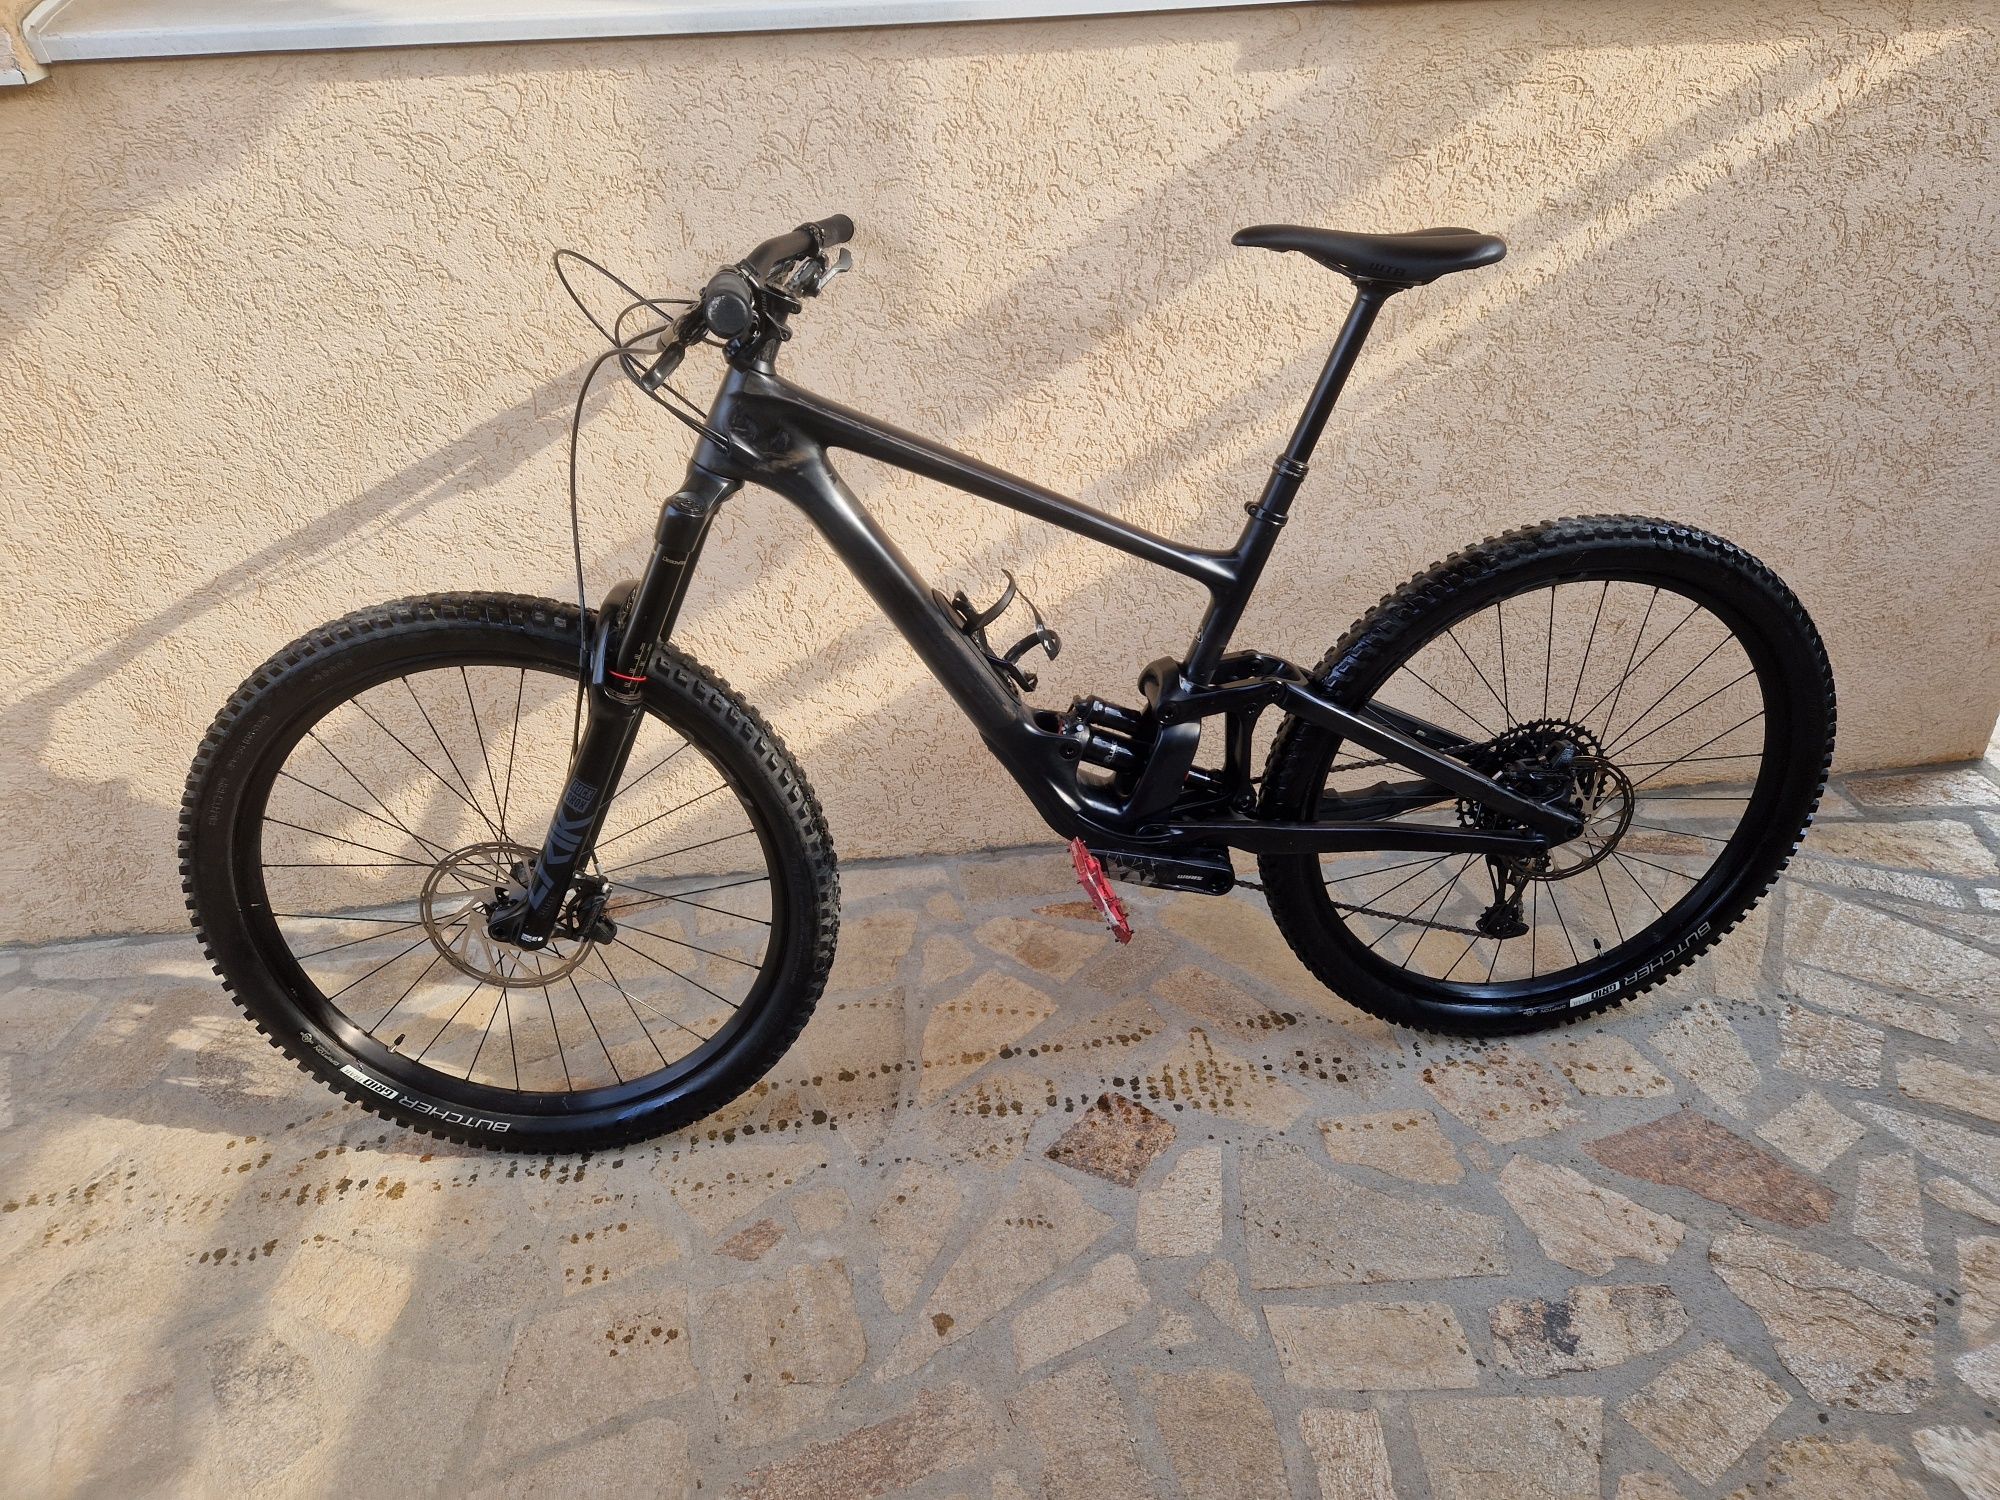 Specialized ENDURO full carbon